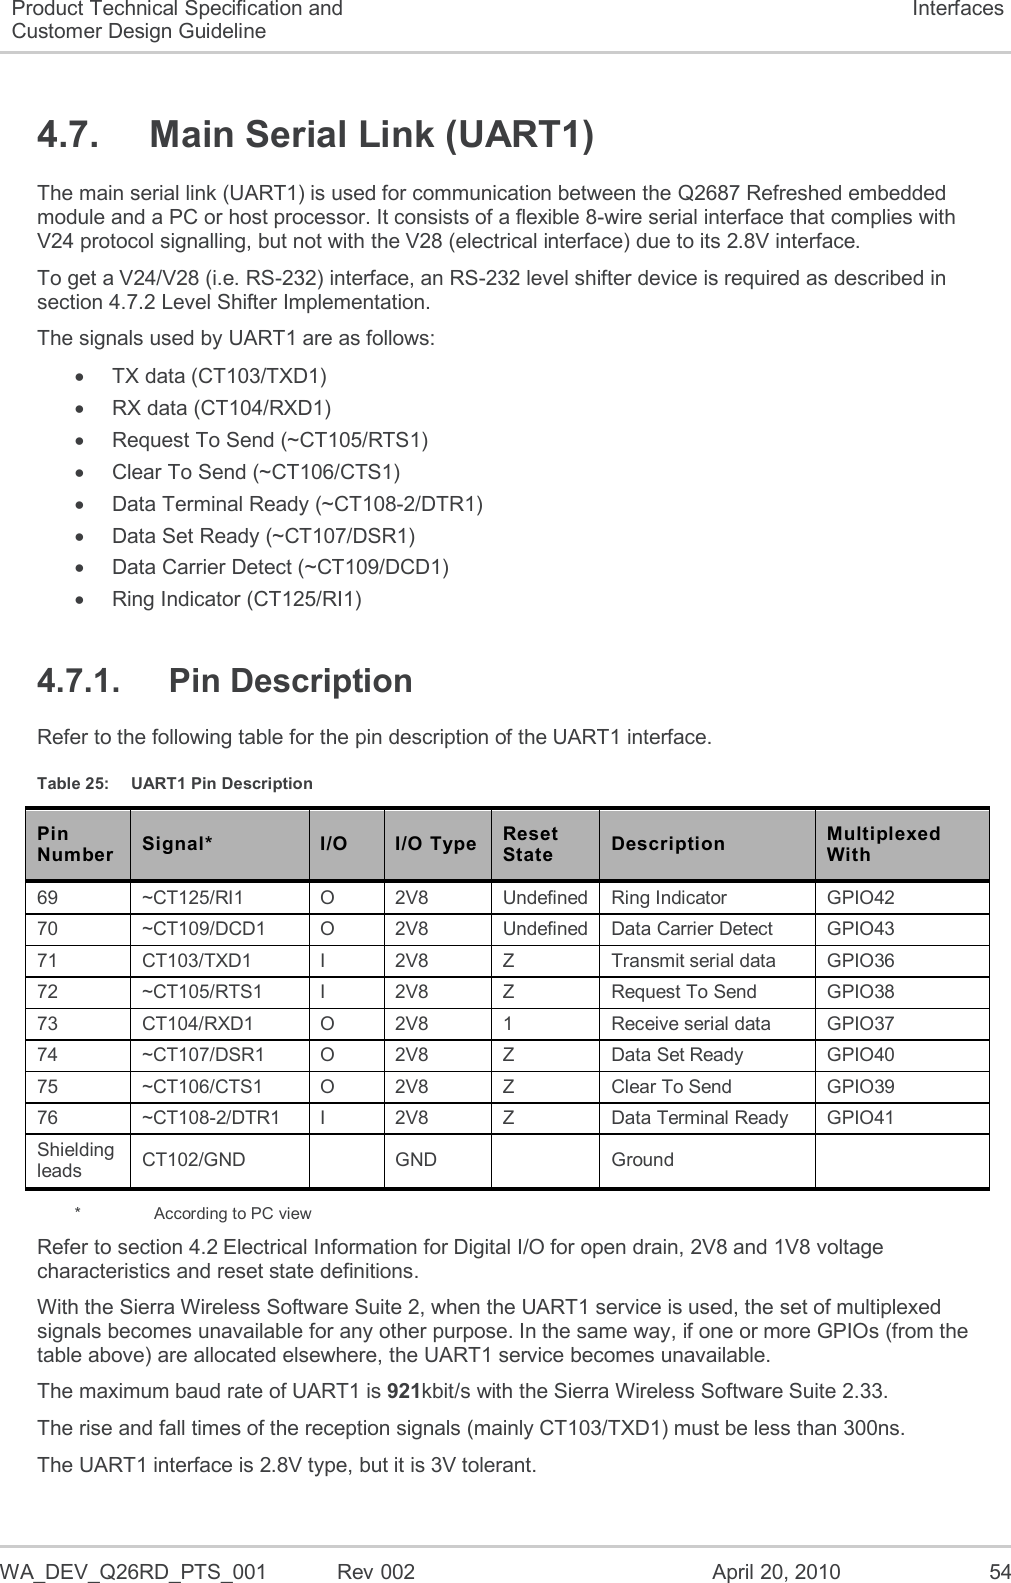  WA_DEV_Q26RD_PTS_001  Rev 002  April 20, 2010 54 Product Technical Specification and Customer Design Guideline Interfaces 4.7.  Main Serial Link (UART1) The main serial link (UART1) is used for communication between the Q2687 Refreshed embedded module and a PC or host processor. It consists of a flexible 8-wire serial interface that complies with V24 protocol signalling, but not with the V28 (electrical interface) due to its 2.8V interface. To get a V24/V28 (i.e. RS-232) interface, an RS-232 level shifter device is required as described in section 4.7.2 Level Shifter Implementation. The signals used by UART1 are as follows:   TX data (CT103/TXD1)   RX data (CT104/RXD1)   Request To Send (~CT105/RTS1)   Clear To Send (~CT106/CTS1)   Data Terminal Ready (~CT108-2/DTR1)    Data Set Ready (~CT107/DSR1)    Data Carrier Detect (~CT109/DCD1)   Ring Indicator (CT125/RI1) 4.7.1.  Pin Description Refer to the following table for the pin description of the UART1 interface. Table 25:  UART1 Pin Description Pin Number Signal* I/O I/O Type Reset State Description Multiplexed With 69 ~CT125/RI1 O 2V8 Undefined Ring Indicator GPIO42 70 ~CT109/DCD1 O 2V8 Undefined Data Carrier Detect GPIO43 71 CT103/TXD1 I 2V8 Z Transmit serial data GPIO36 72 ~CT105/RTS1 I 2V8 Z Request To Send GPIO38 73 CT104/RXD1 O 2V8 1 Receive serial data GPIO37 74 ~CT107/DSR1 O 2V8 Z Data Set Ready GPIO40 75 ~CT106/CTS1 O 2V8 Z Clear To Send GPIO39 76 ~CT108-2/DTR1 I 2V8 Z Data Terminal Ready GPIO41 Shielding leads CT102/GND  GND  Ground  *    According to PC view Refer to section 4.2 Electrical Information for Digital I/O for open drain, 2V8 and 1V8 voltage characteristics and reset state definitions. With the Sierra Wireless Software Suite 2, when the UART1 service is used, the set of multiplexed signals becomes unavailable for any other purpose. In the same way, if one or more GPIOs (from the table above) are allocated elsewhere, the UART1 service becomes unavailable. The maximum baud rate of UART1 is 921kbit/s with the Sierra Wireless Software Suite 2.33. The rise and fall times of the reception signals (mainly CT103/TXD1) must be less than 300ns. The UART1 interface is 2.8V type, but it is 3V tolerant. 